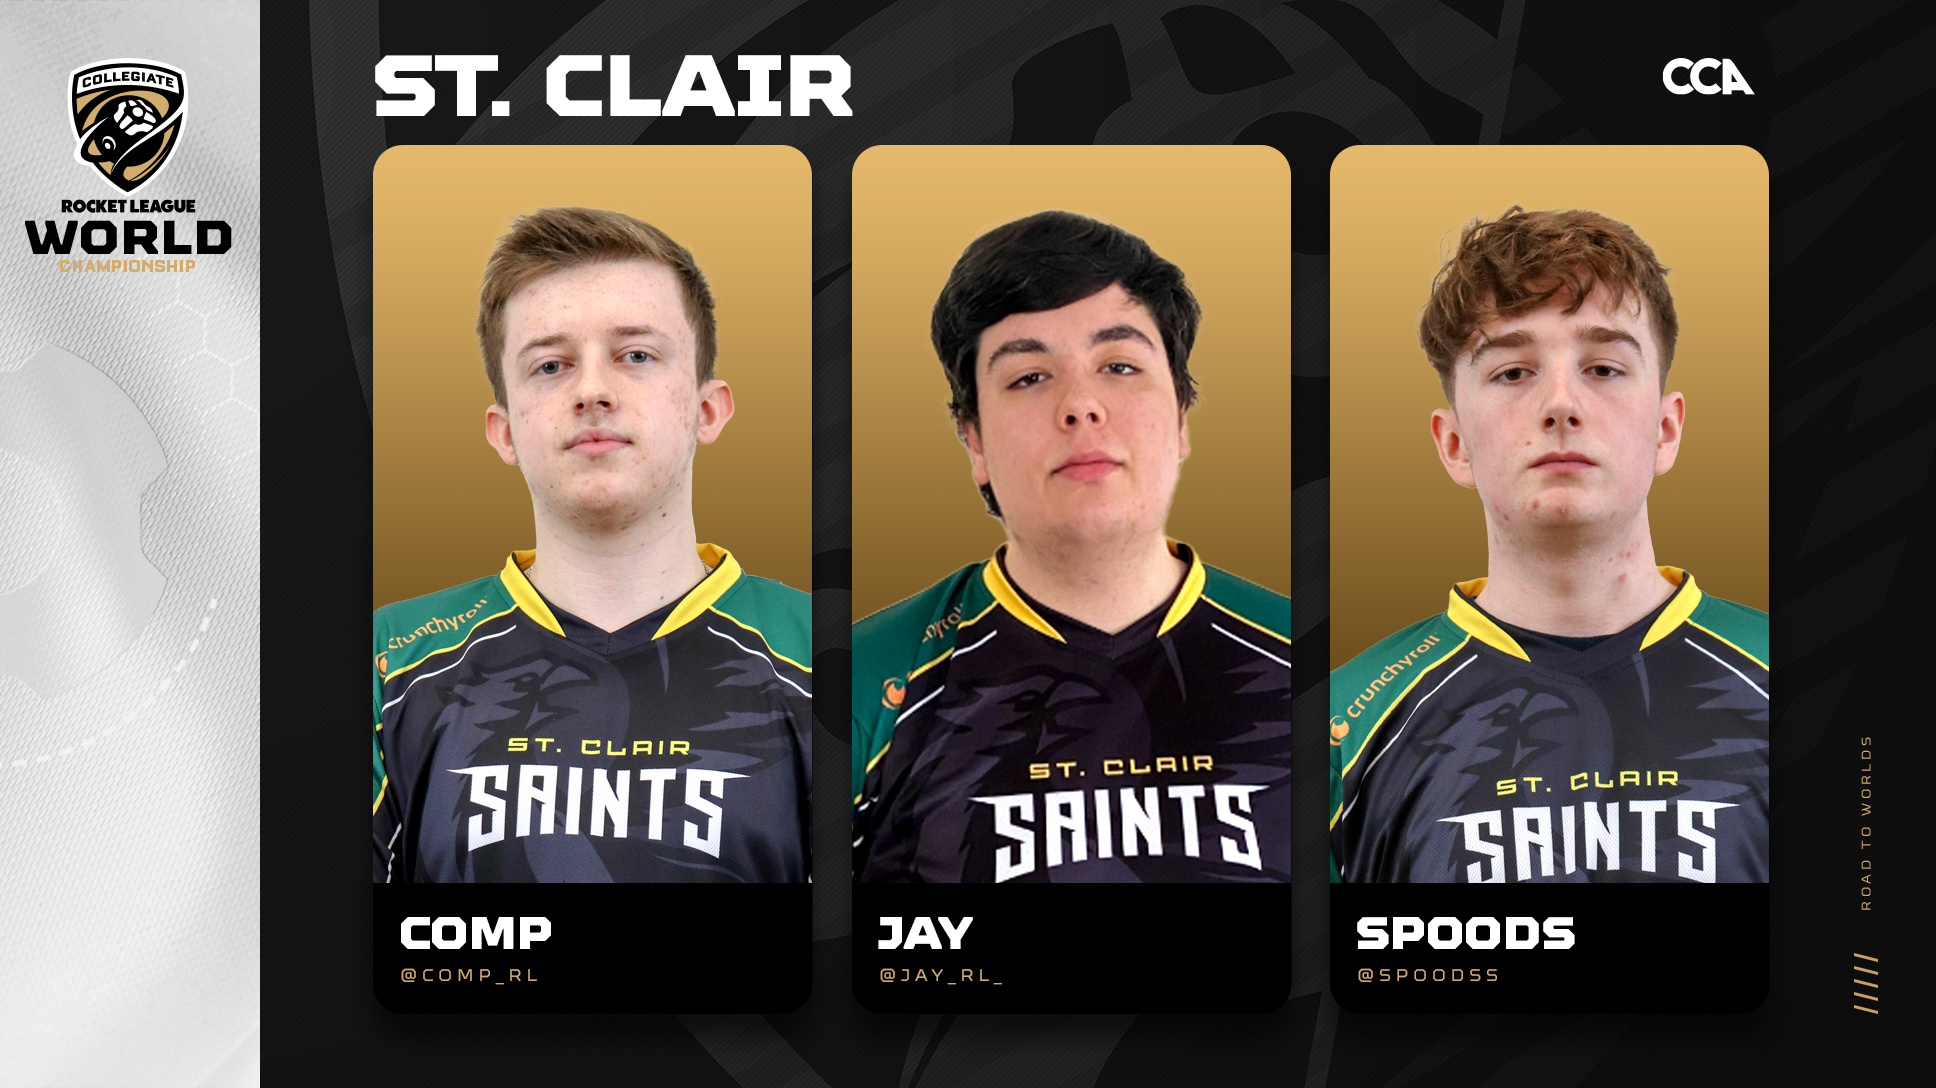 St. Clair Road to Worlds header with images of Comp, Jay, and Spoods..